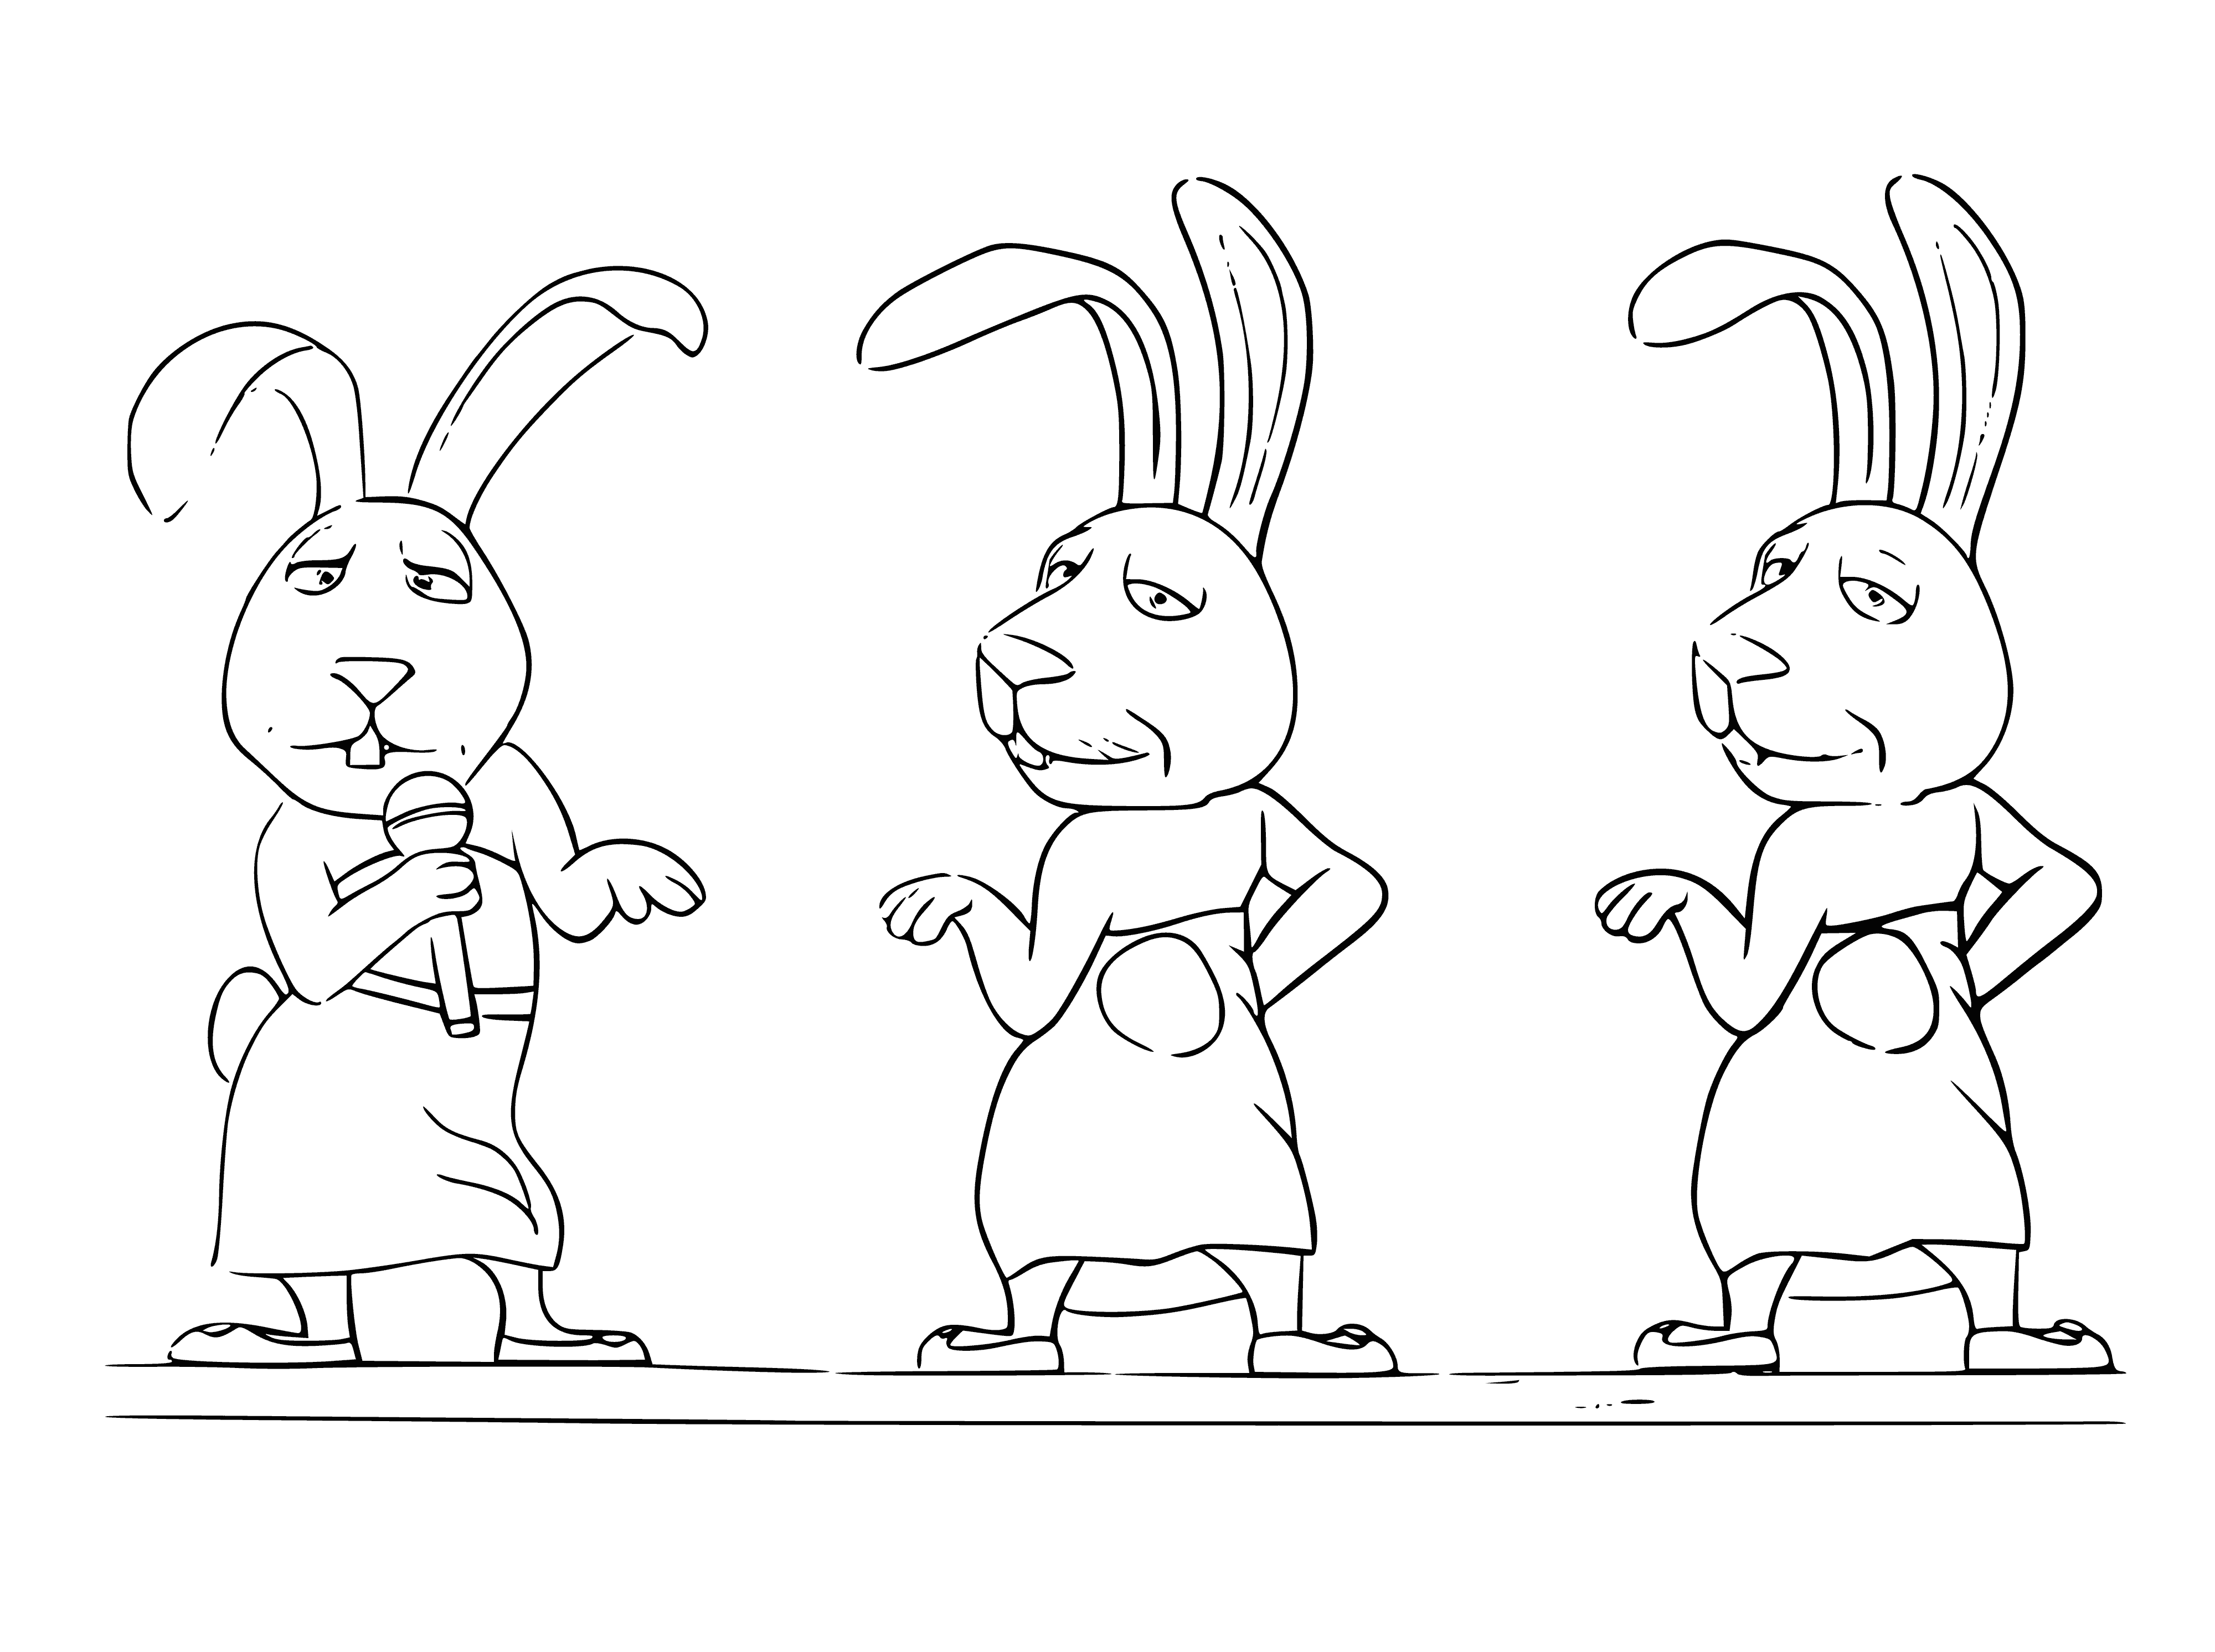 coloring page: Two rabbits sing, light brown looks up, dark brown has eyes closed, both have arms raised. #theater